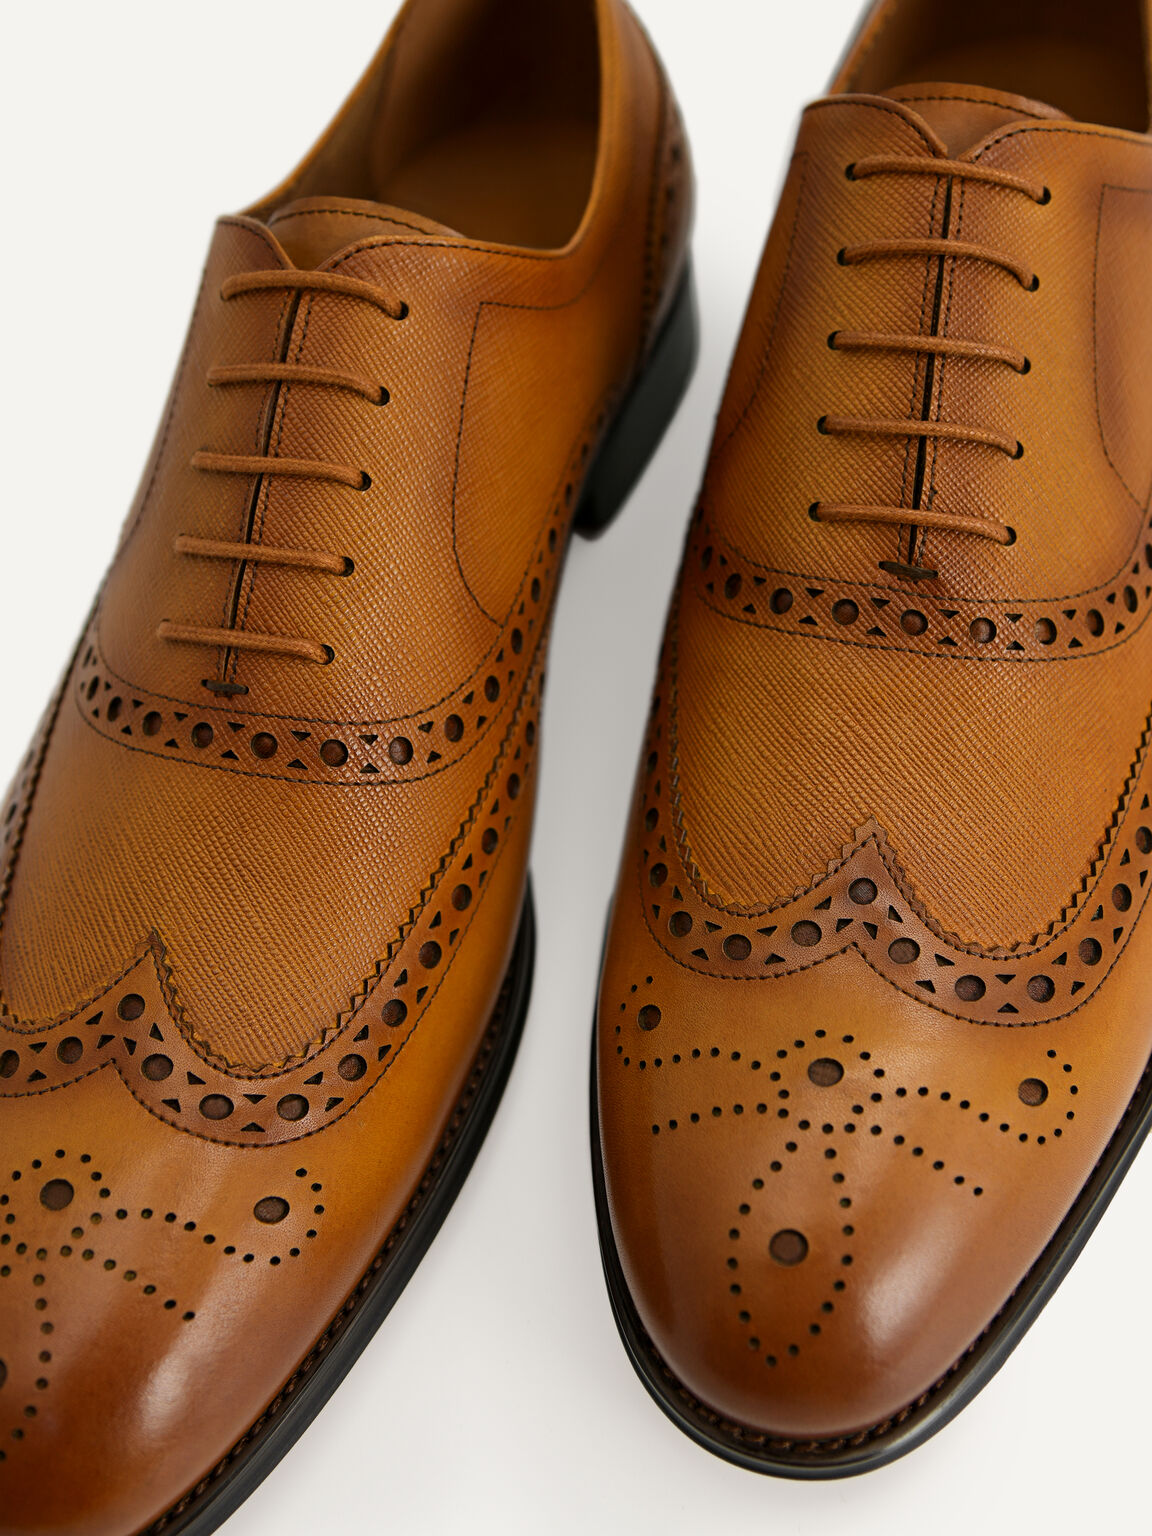 Textured Brogue Oxford Shoes, Camel